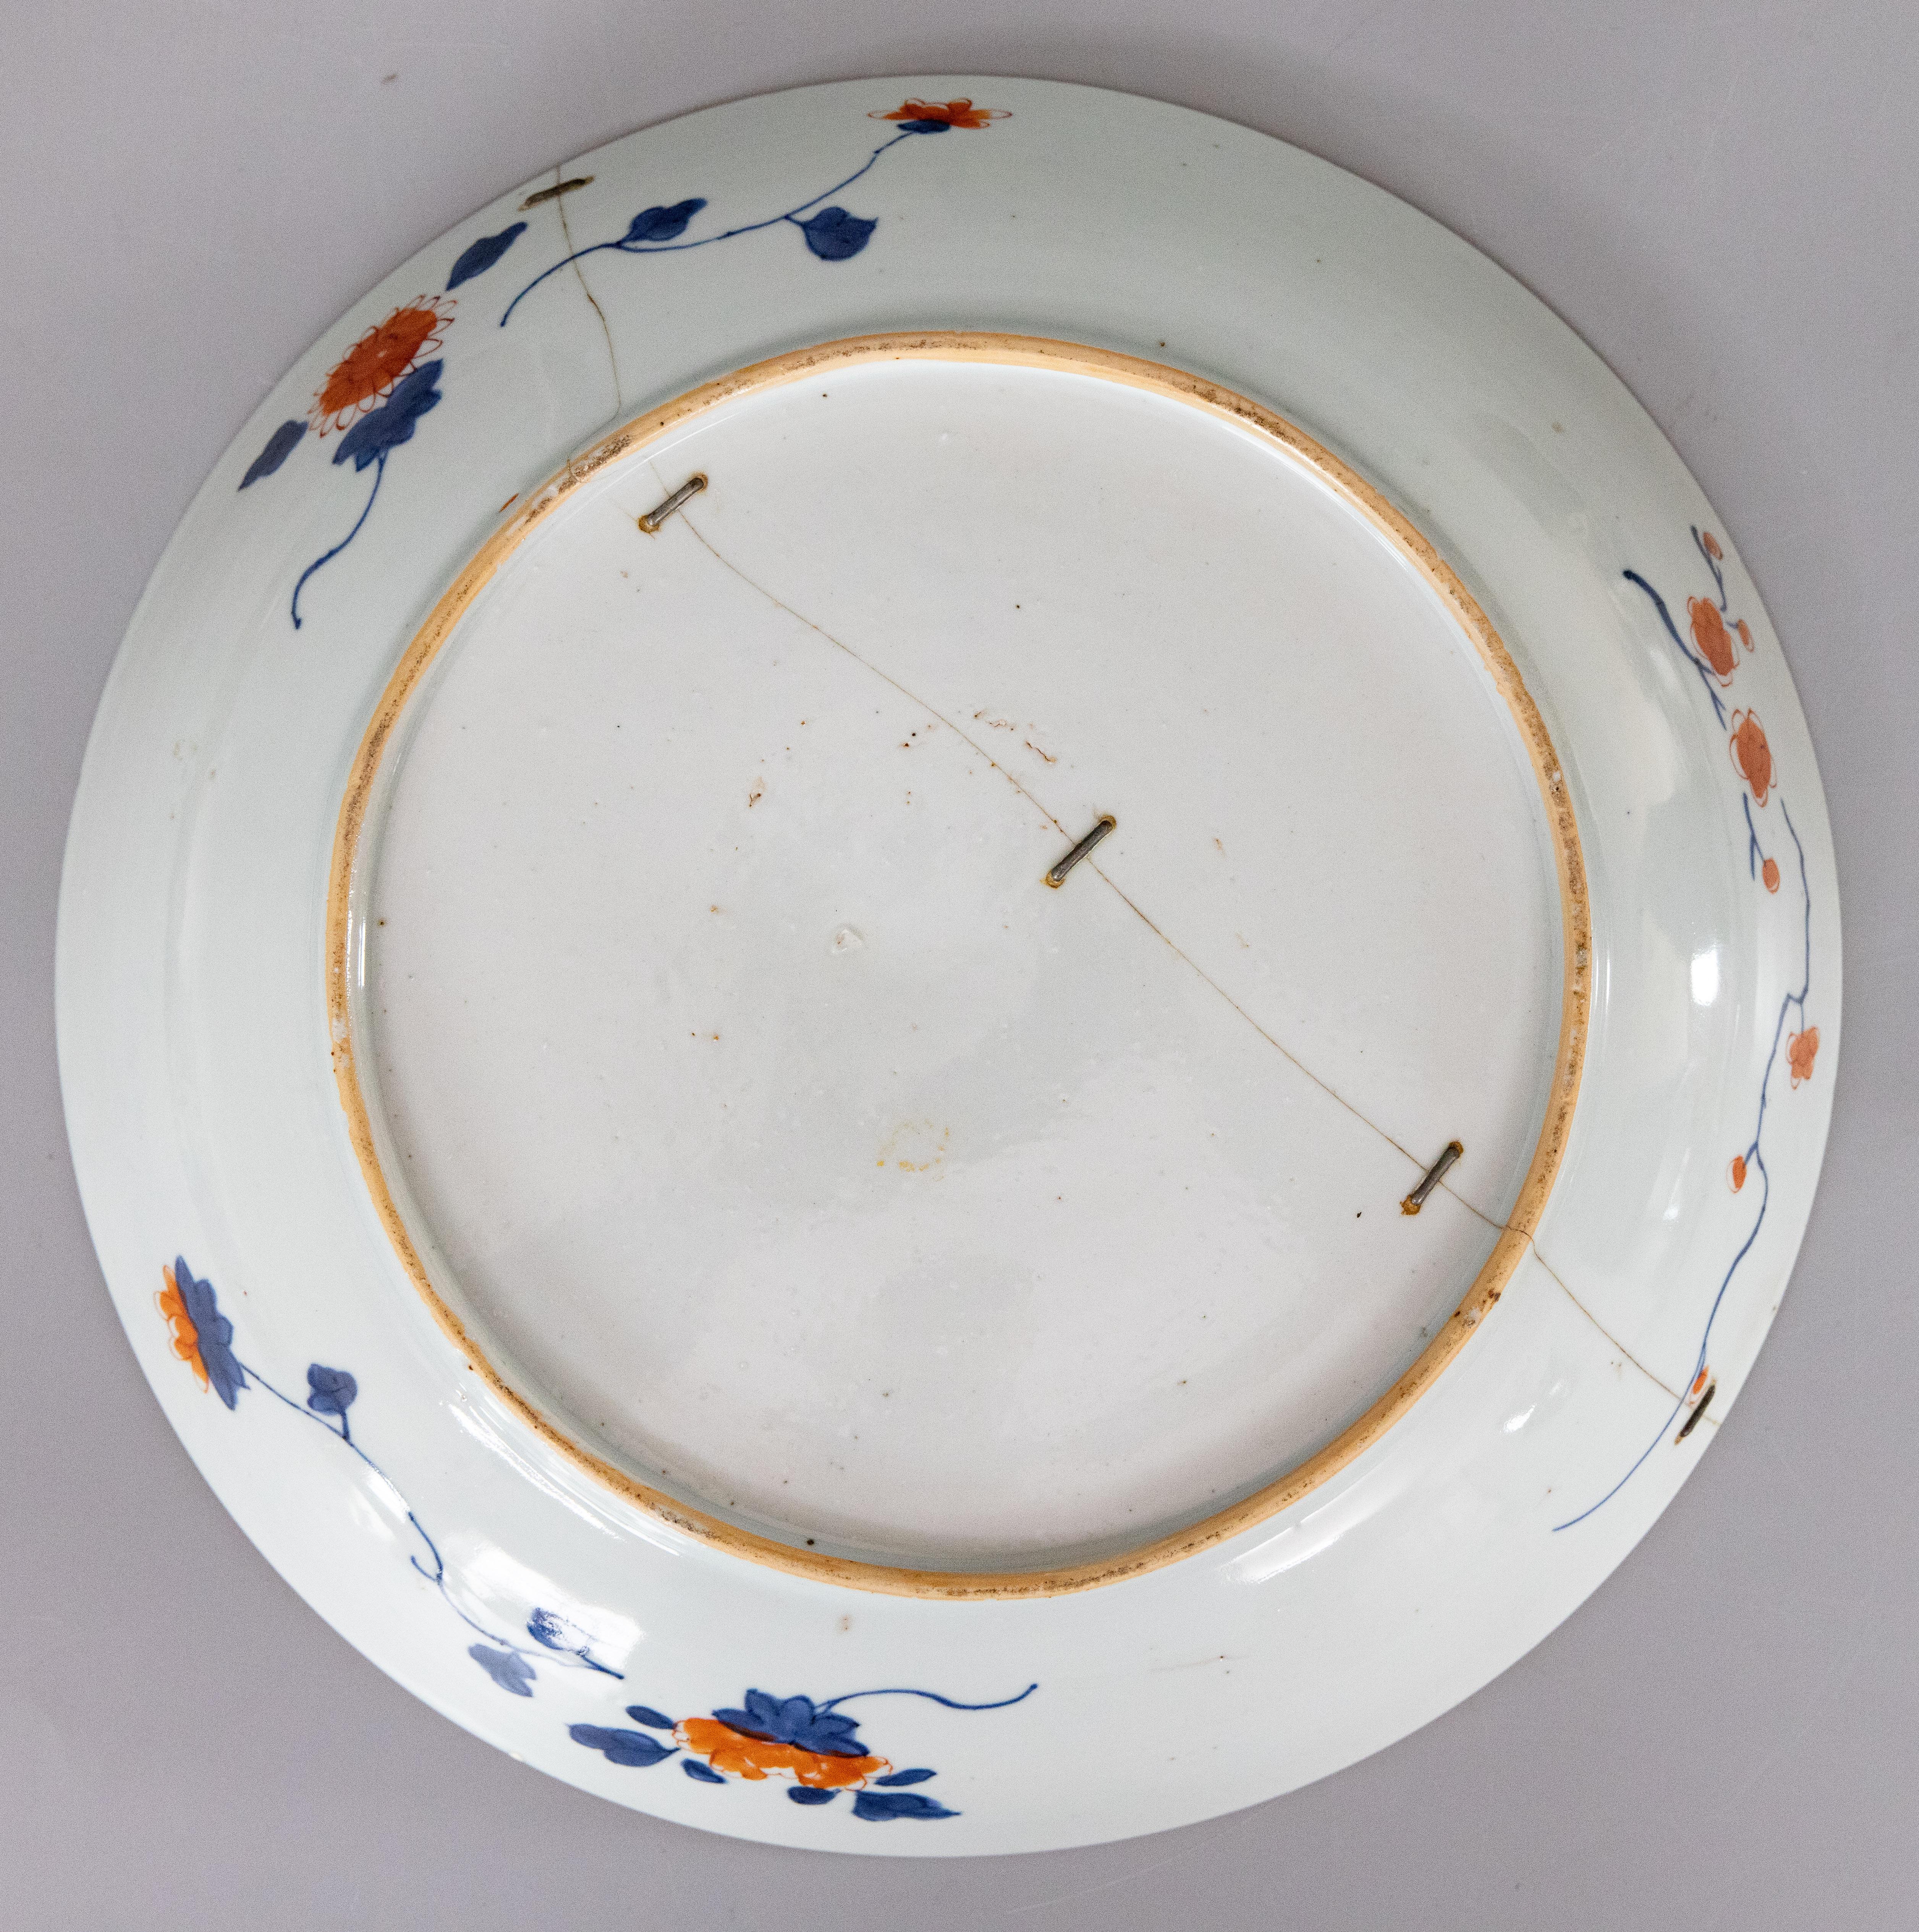 Striking 19th century antique Imari staple charger featuring vibrant oranges, blues, and golds. While a broken plate or charger would be discarded in today's era, other generations found unique ways to repair and continue using cherished treasures.